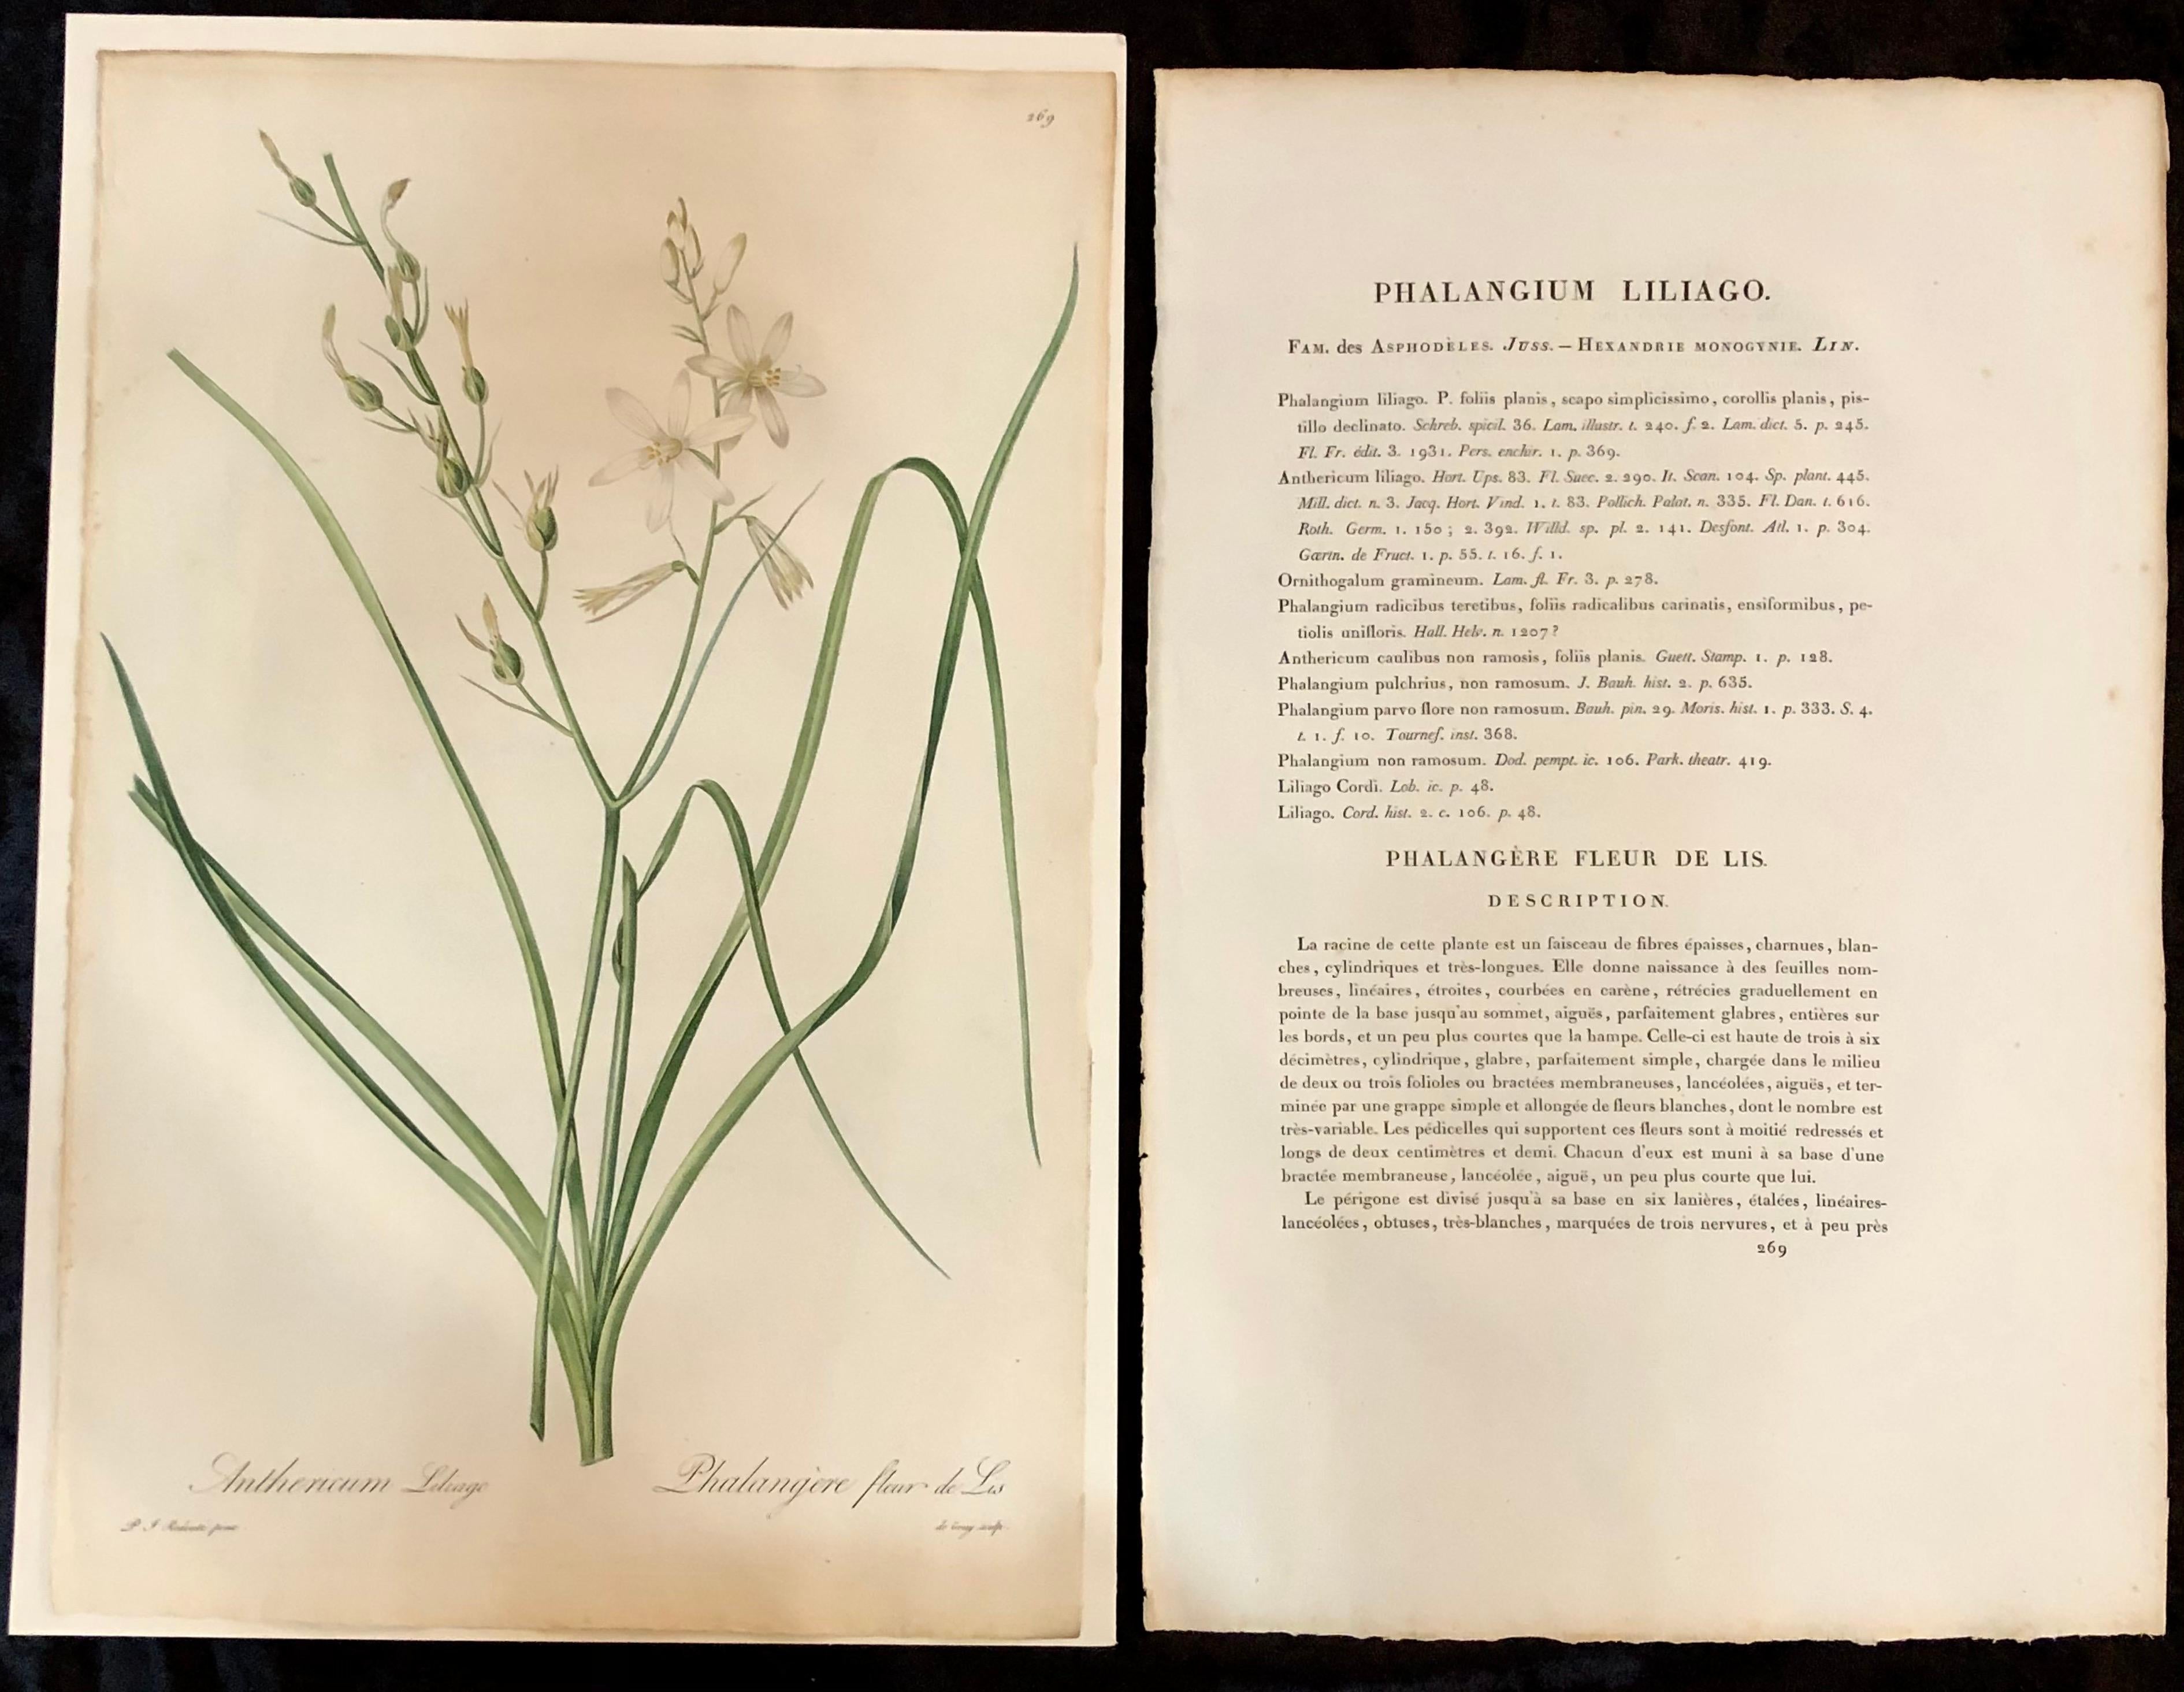 Phalangium Liliago hand colored engraving signed P.J. Redoute.
One of a set of large and impressive well painted set of nine floral works each having history and literature on reverse.
The highest peak of Redoute's artistic and botanical